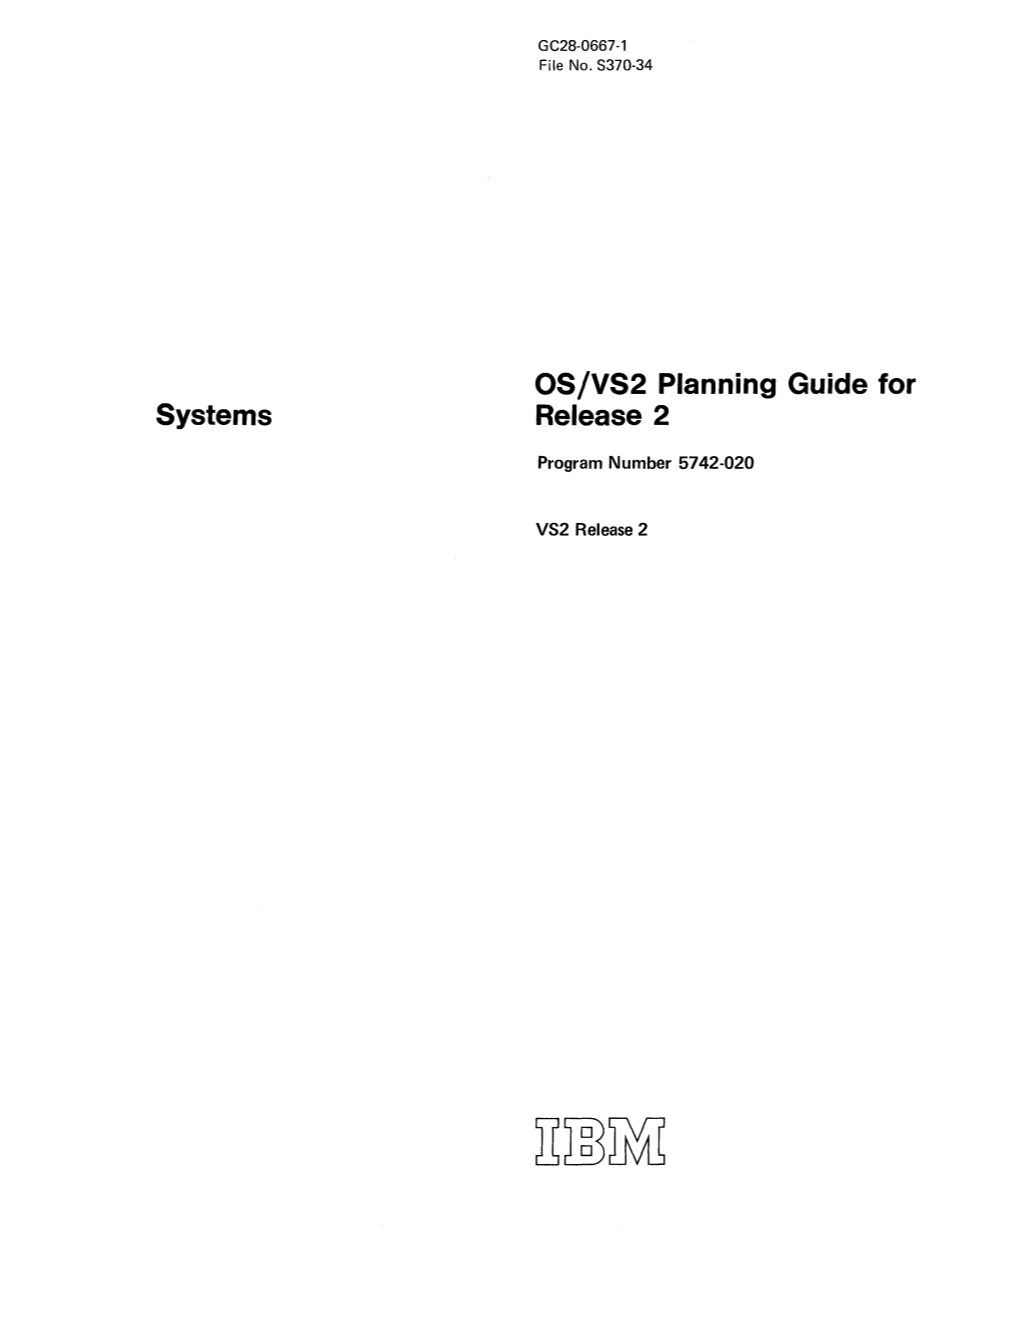 Systems OS/VS2 Planning Guide for Release 2